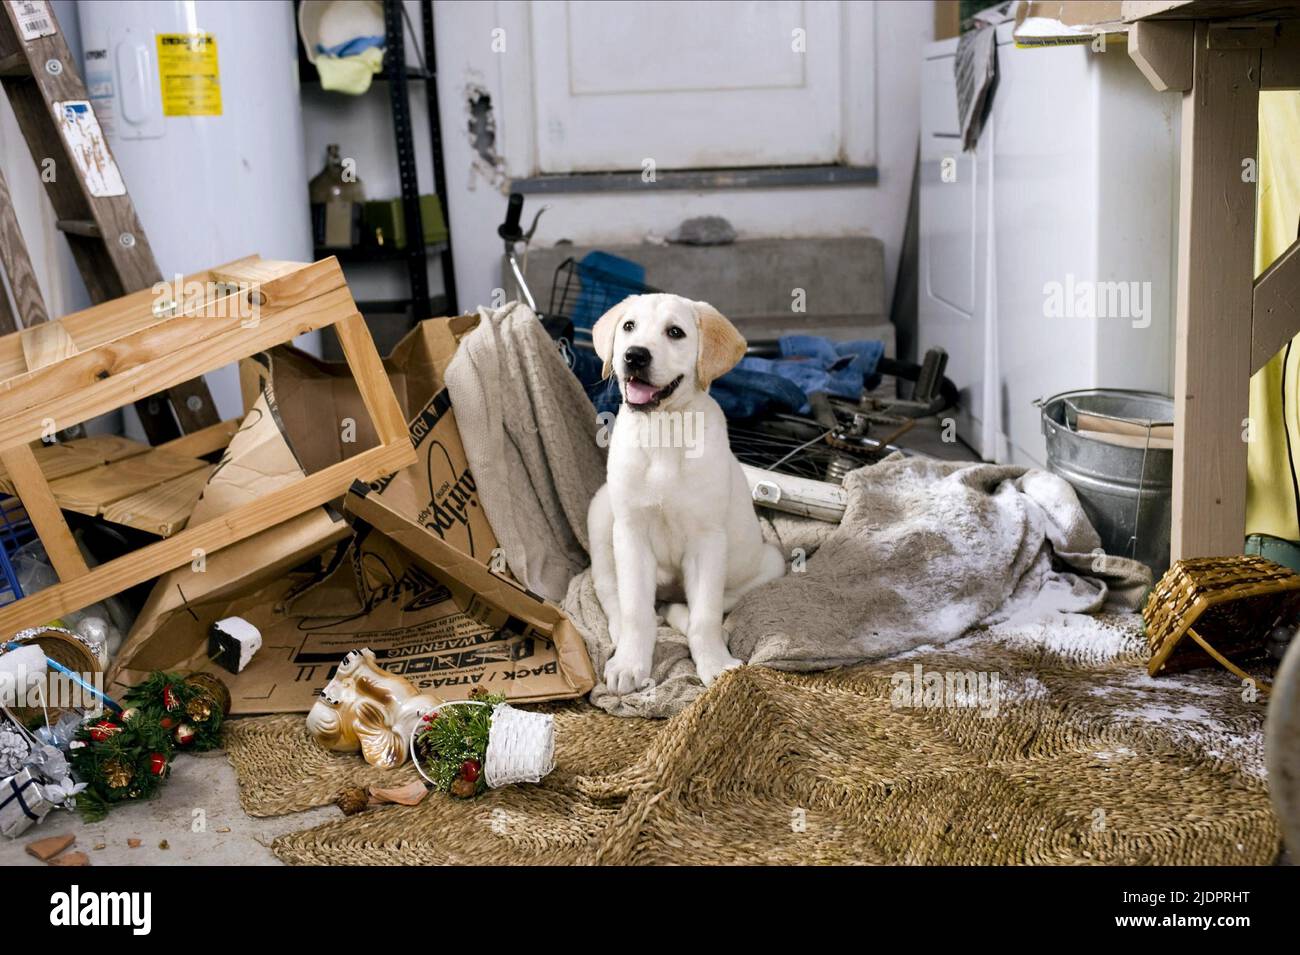 MARLEY, MARLEY and ME, 2008, Stock Photo